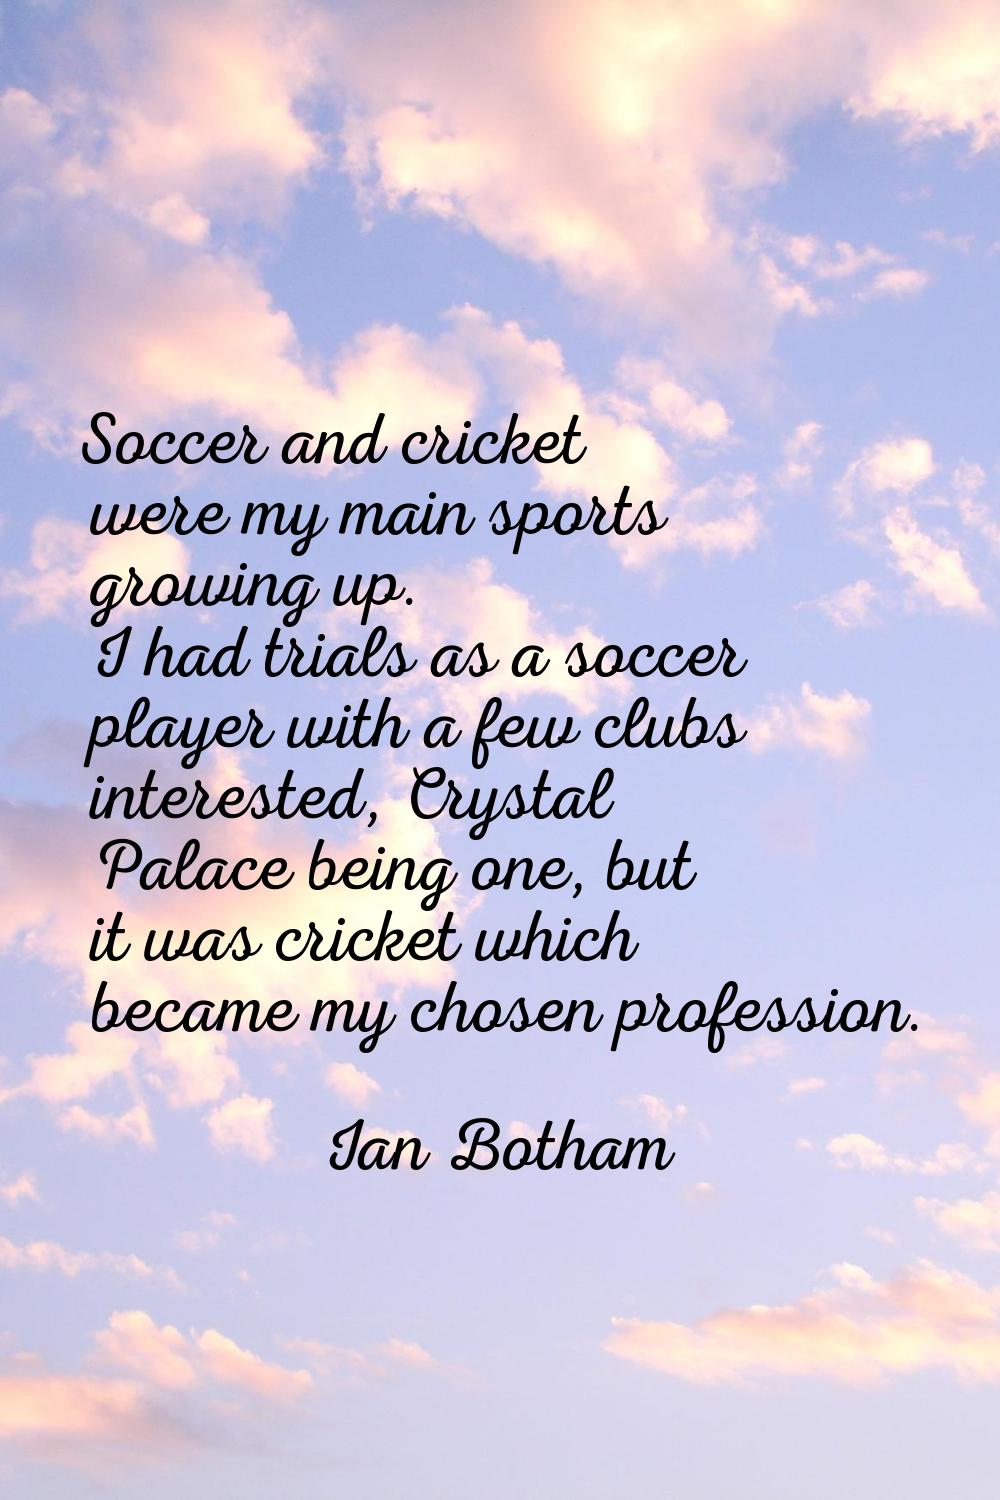 Soccer and cricket were my main sports growing up. I had trials as a soccer player with a few clubs